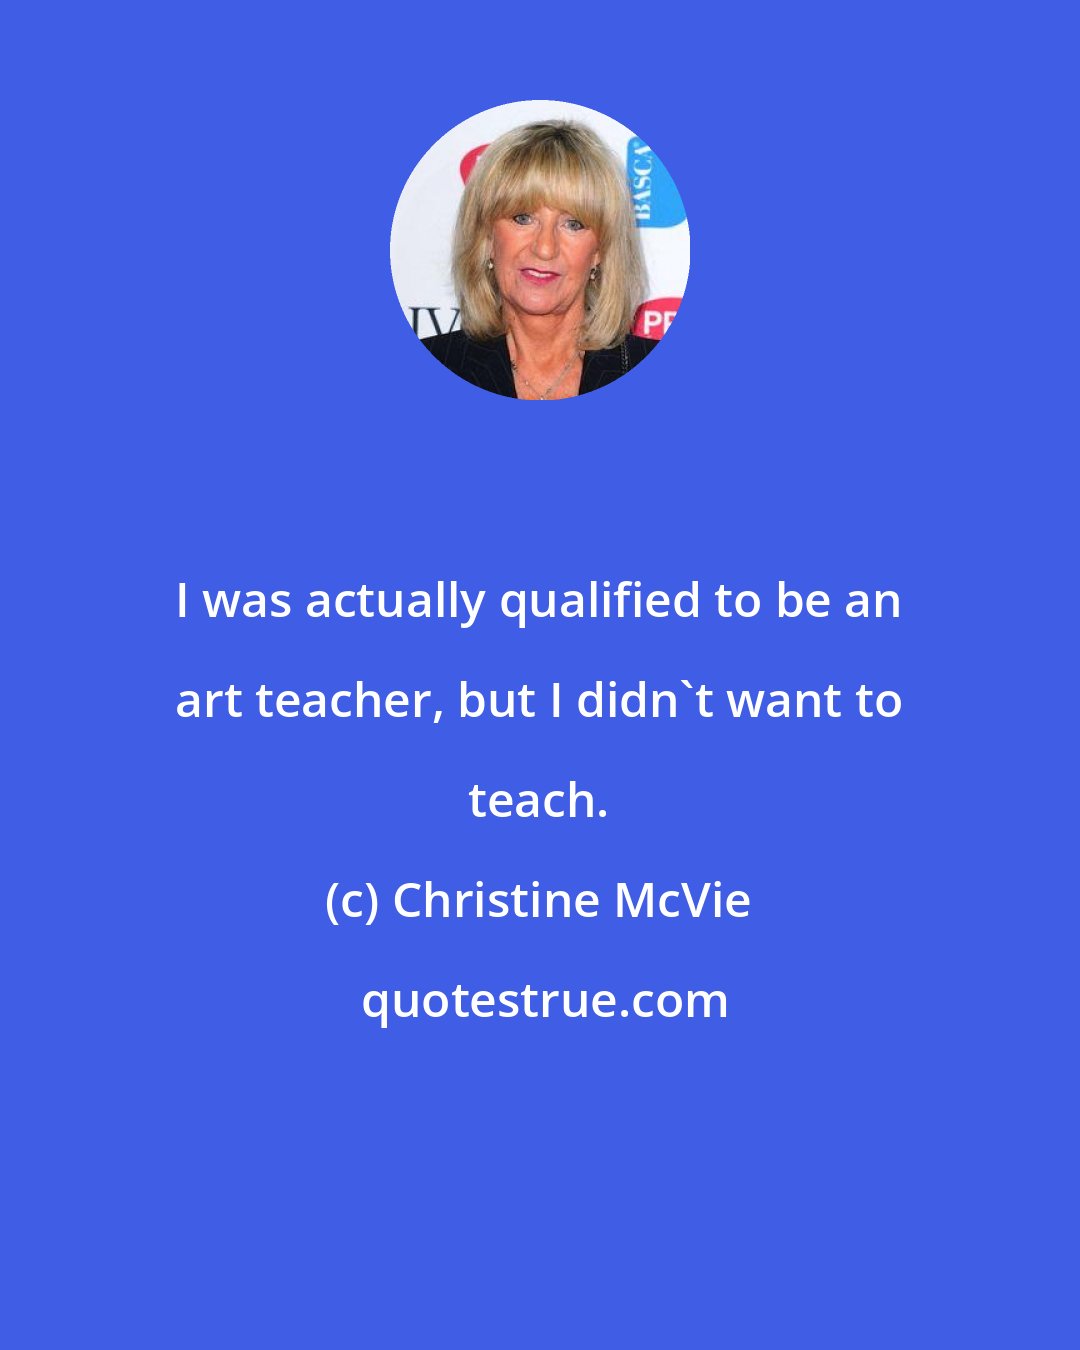 Christine McVie: I was actually qualified to be an art teacher, but I didn't want to teach.